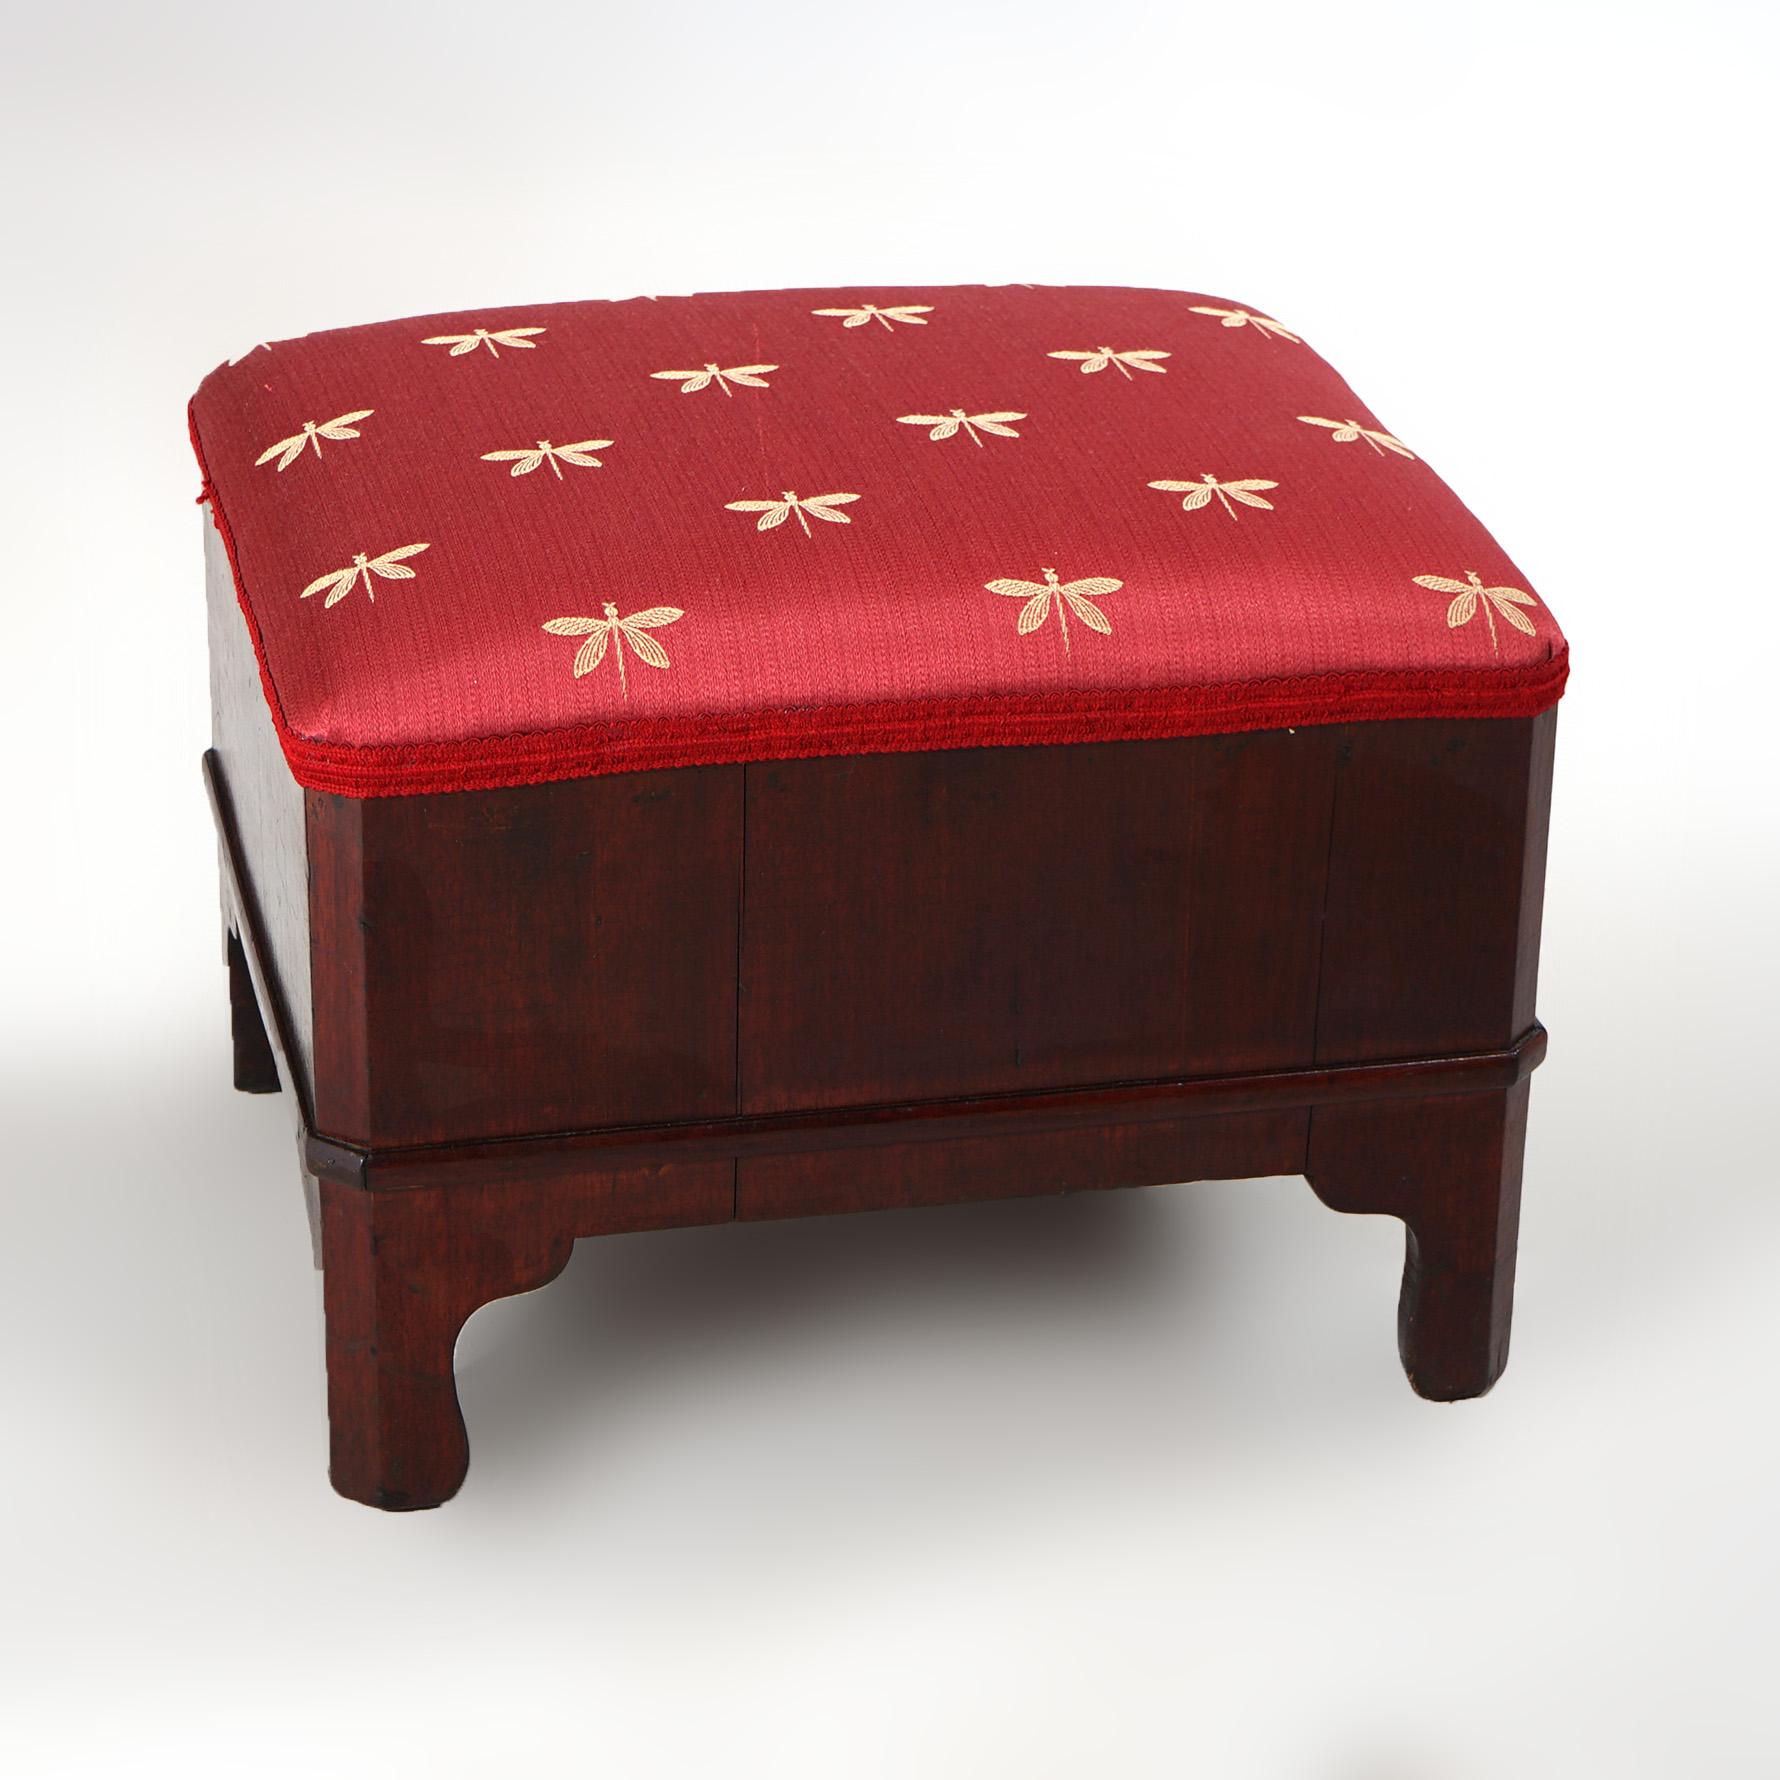 Antique Classical American Empire Mahogany Stool C1840’s For Sale 2